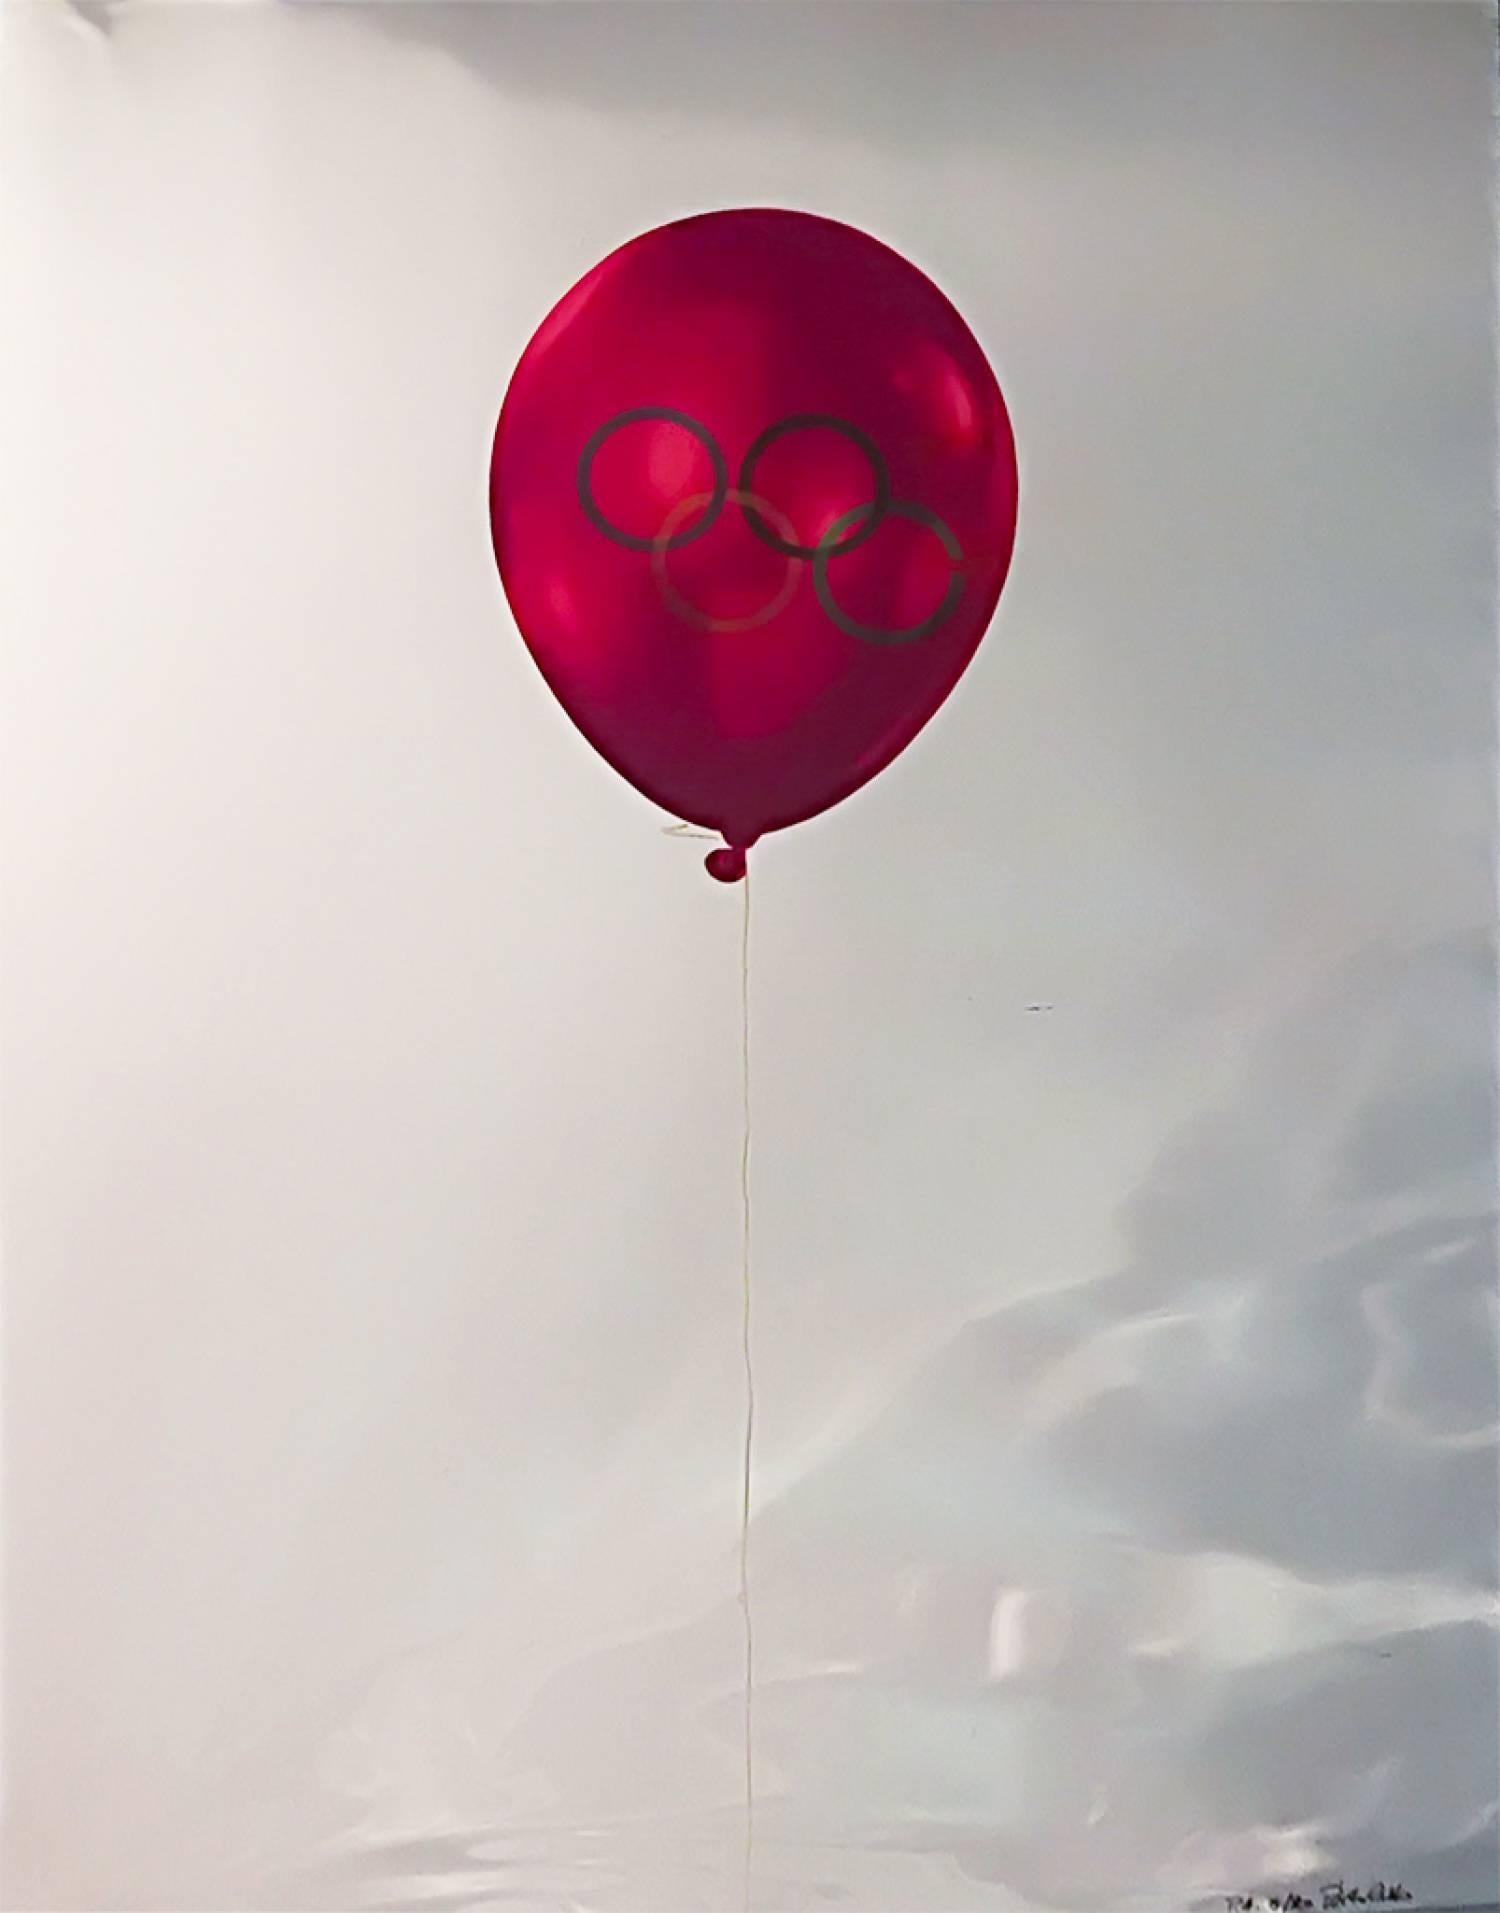 Olympic Balloons – Screen Print on Aluminium by M. Pistoletto - 1984  - Gray Figurative Print by Michelangelo Pistoletto